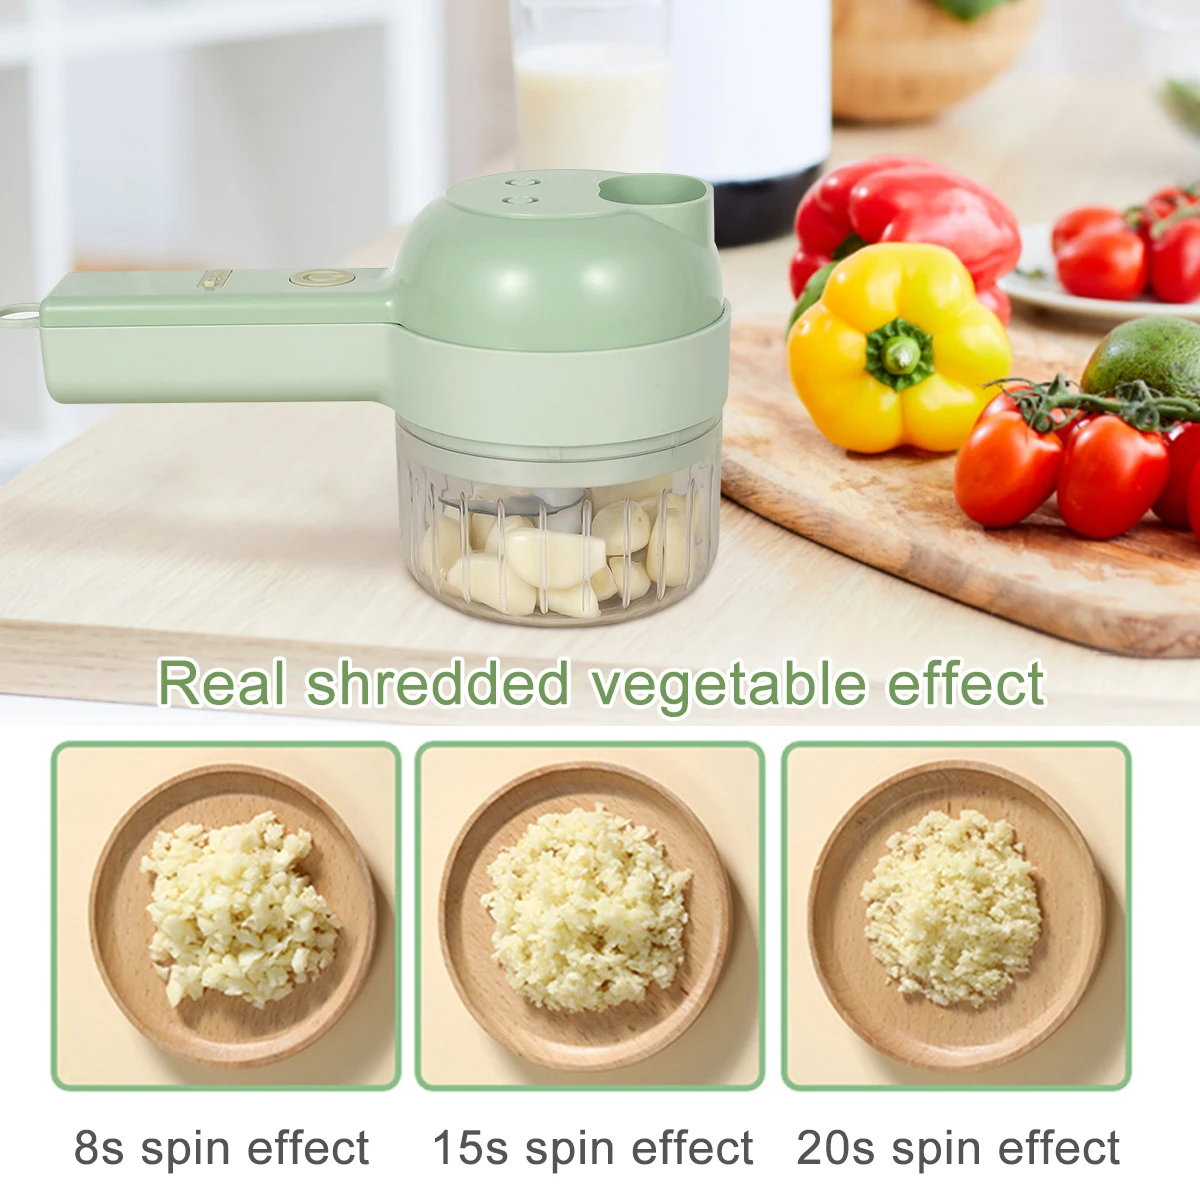 https://ae01.alicdn.com/kf/S3a2e96b09d3a4d41b3b2ff698e304a38b/Mini-Food-Processor-USB-Rechargeable-Fruit-and-Vegetable-Cutter-1500mAh-Wireless-Electric-Garlic-Mincer-Portable-for.jpg